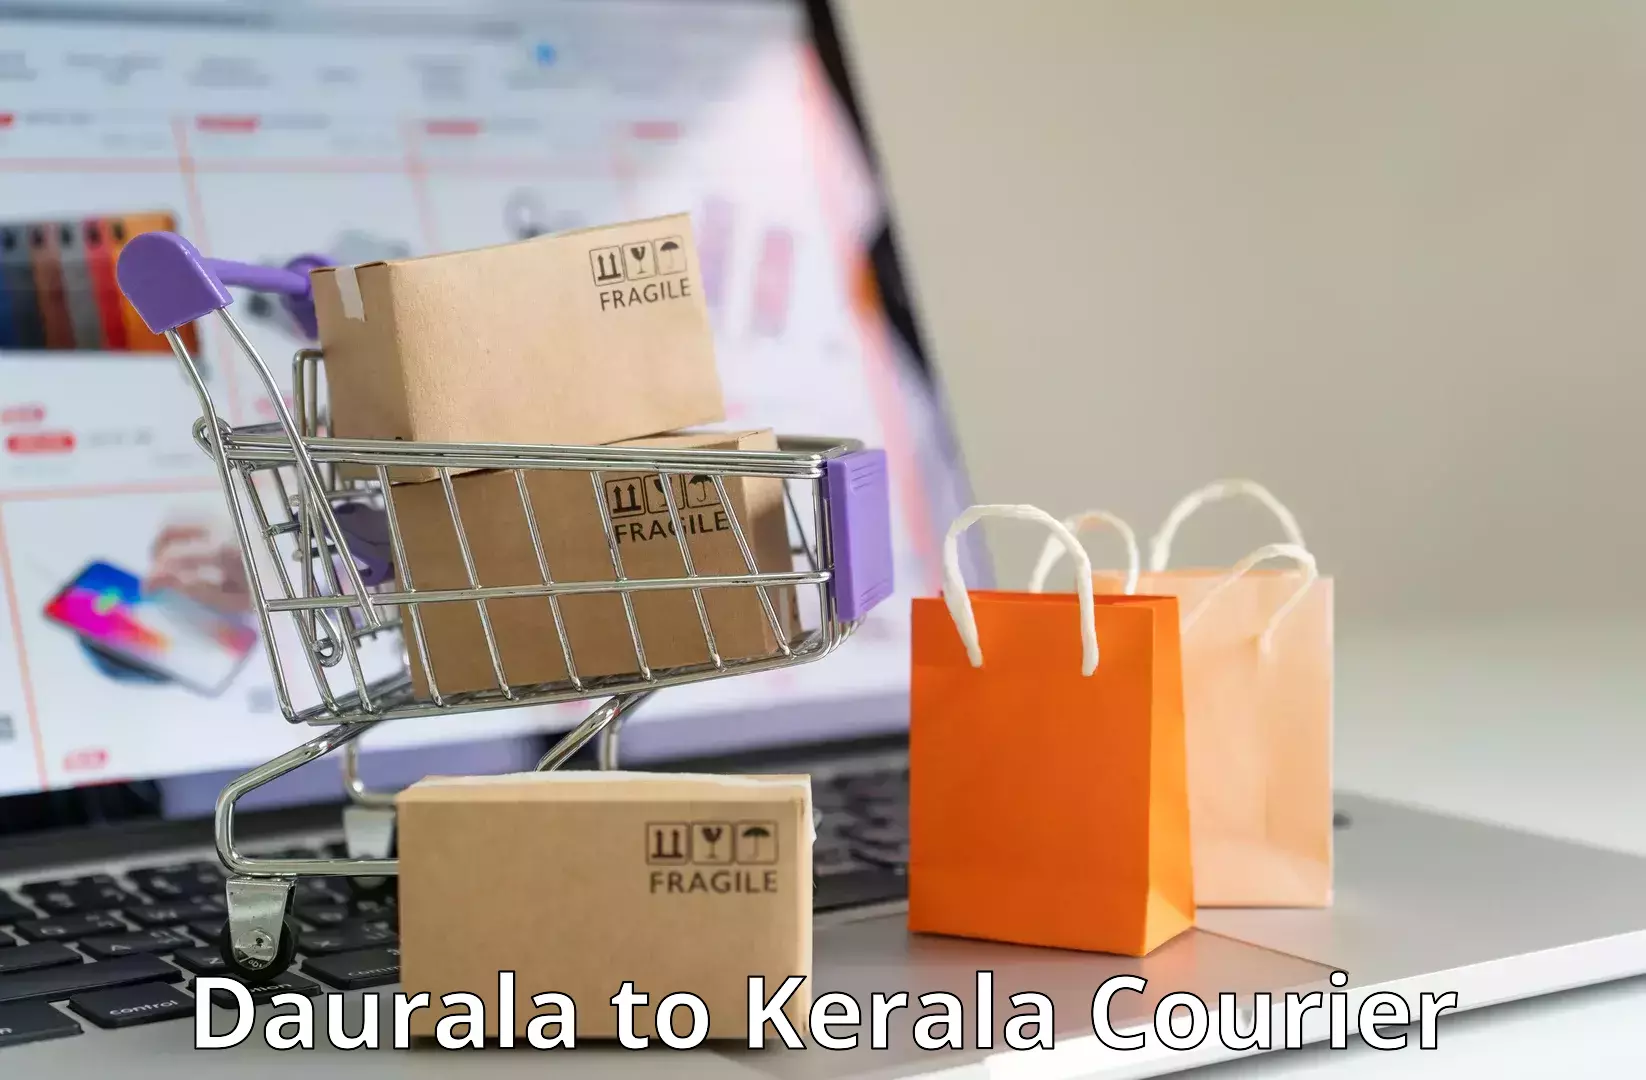 Personal courier services Daurala to Kuchi